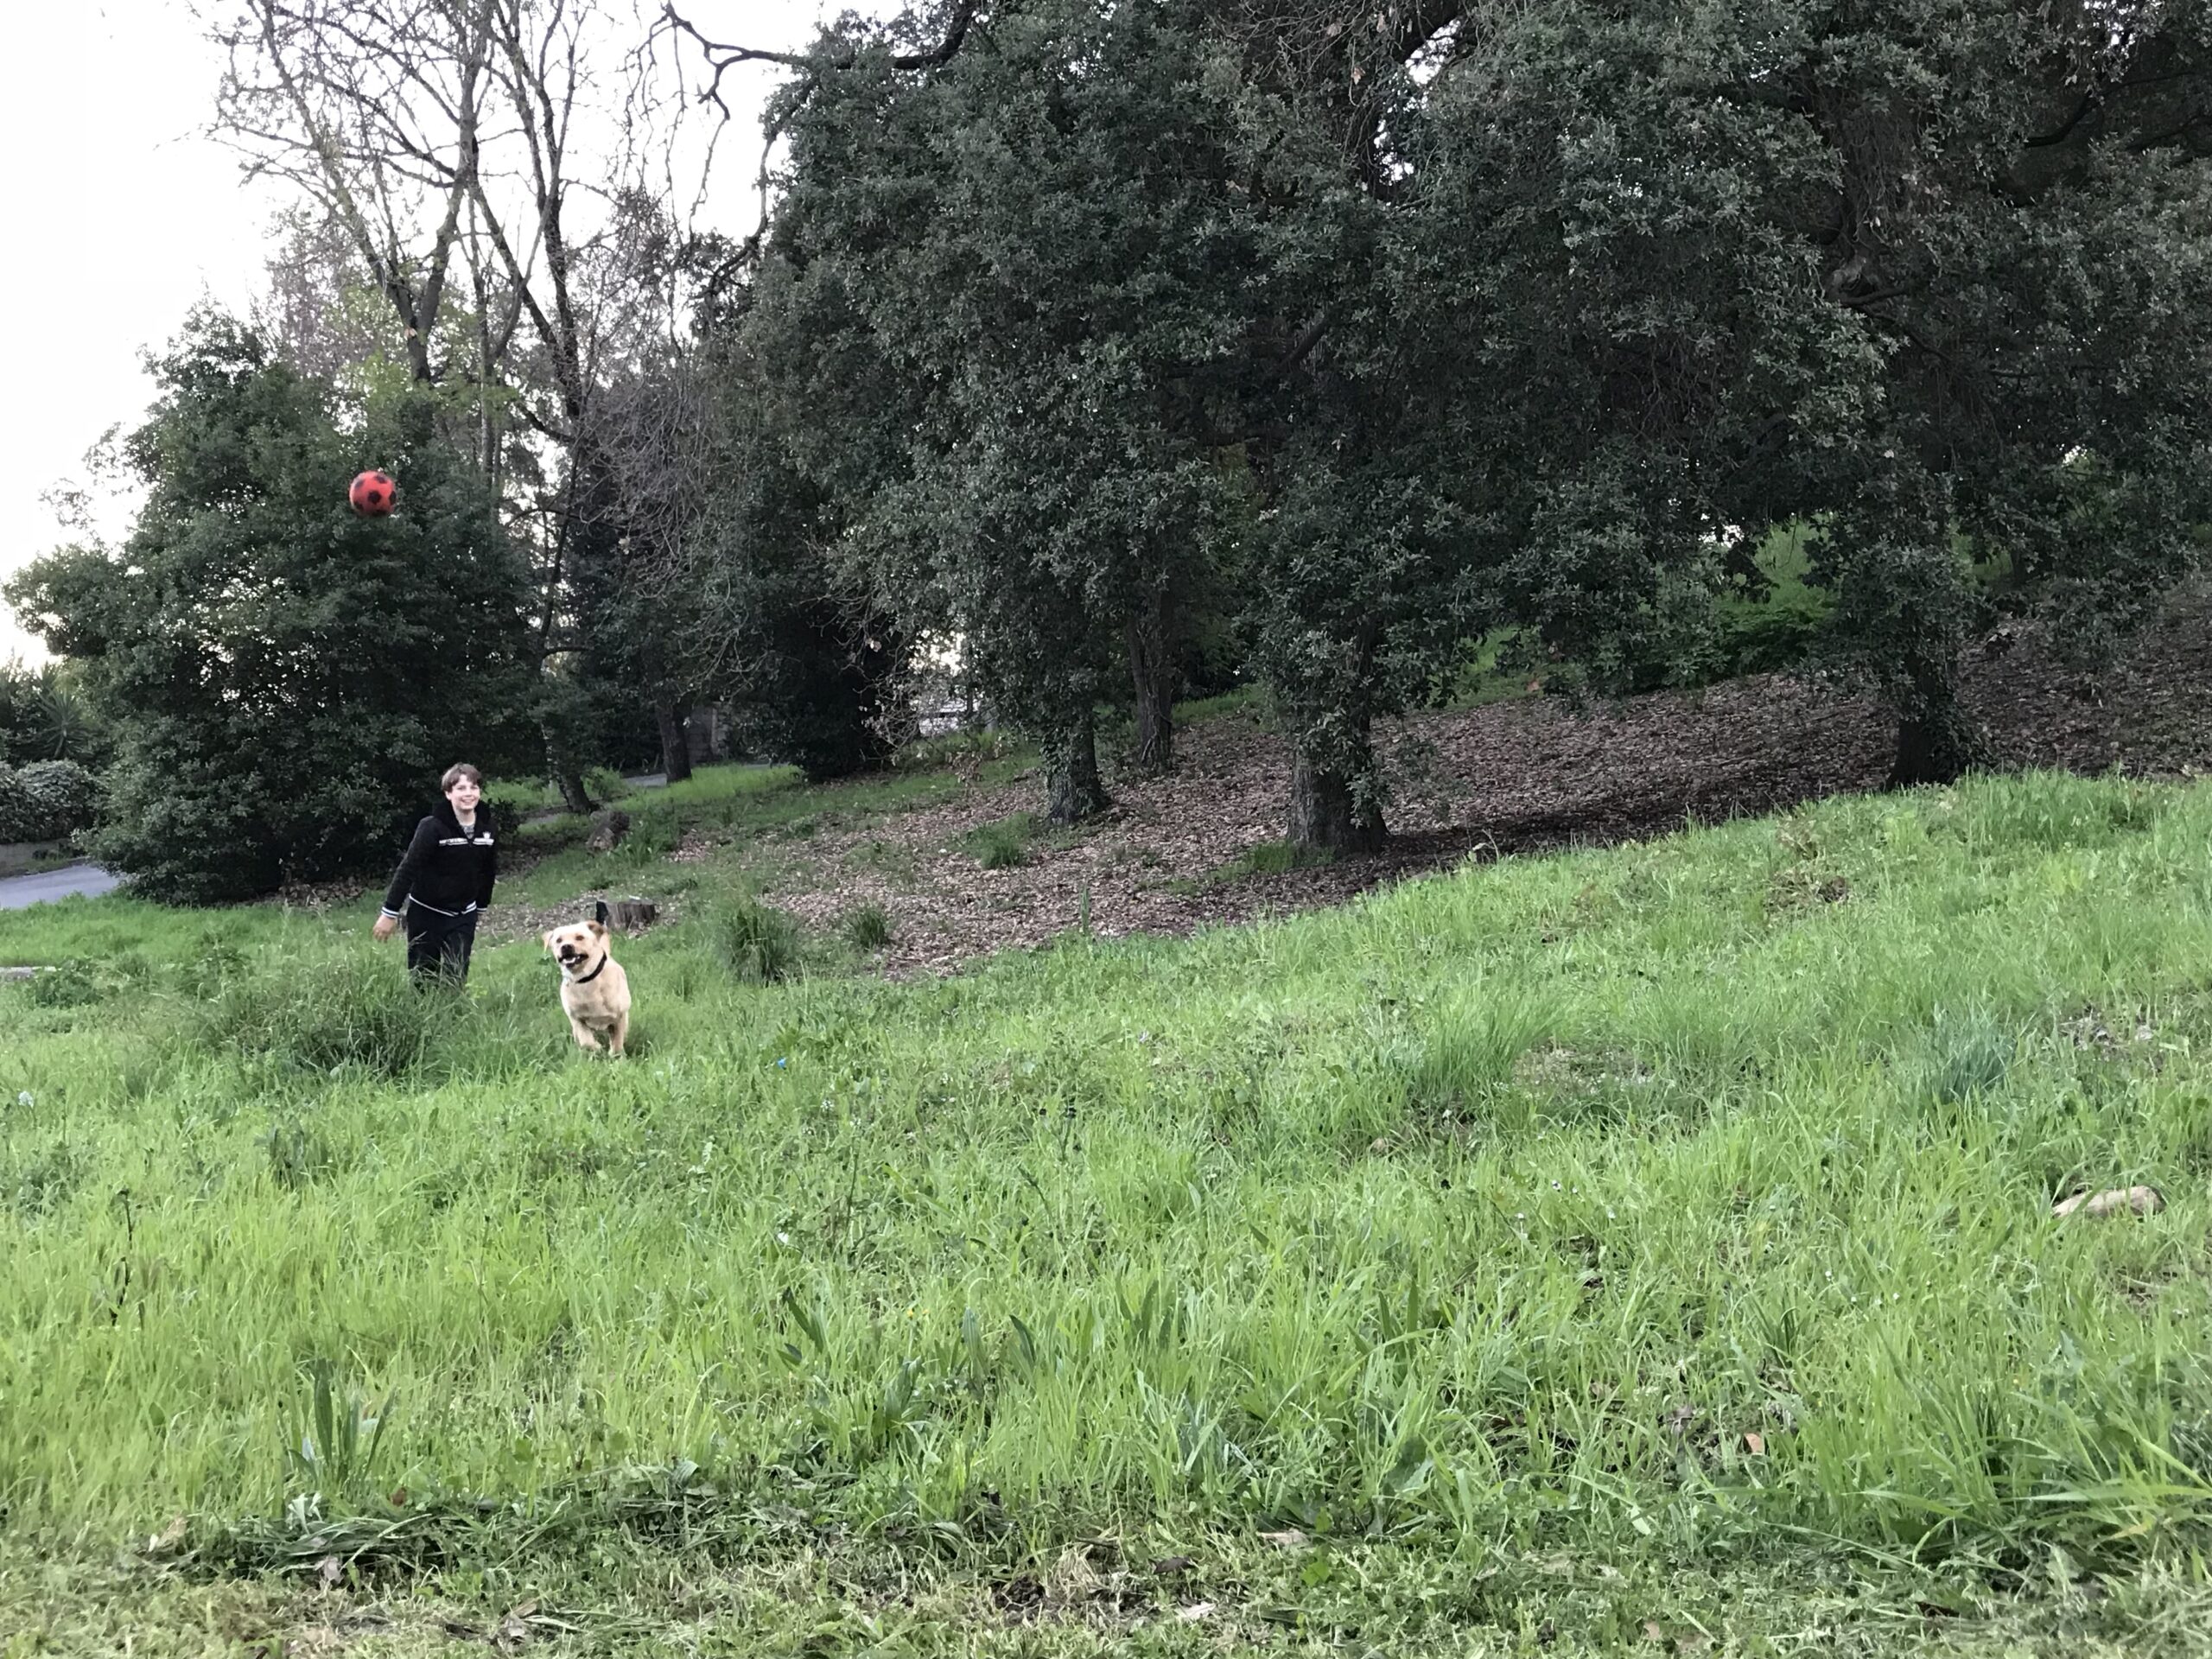 In a large green meadow lined with big oak trees are a young smiling boy who threw a red ball in the air and a yellow labrador running to grab it